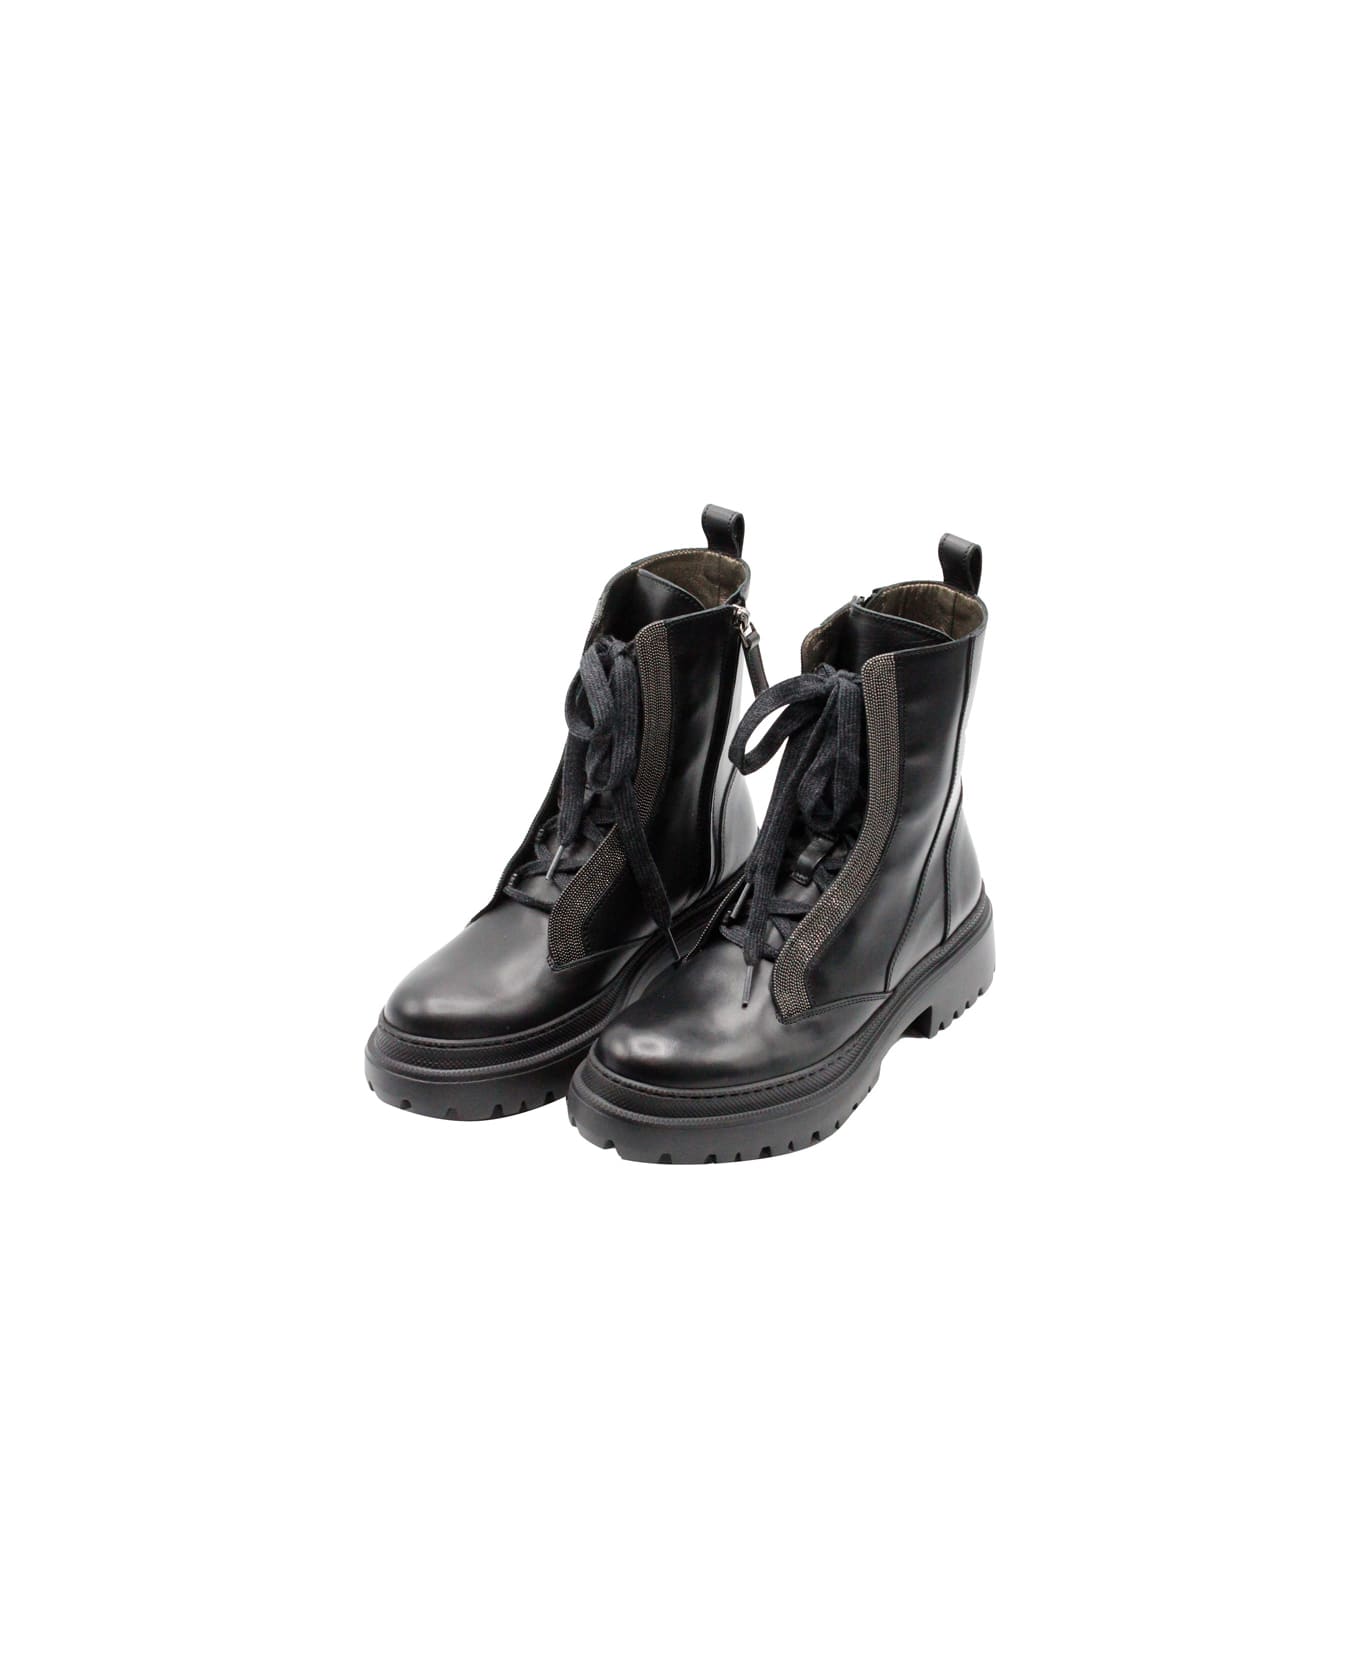 Brunello Cucinelli Amphibious Ankle Boot In Leather With Side Zip And Jewels On The Side Band Of The Laces - Black ブーツ